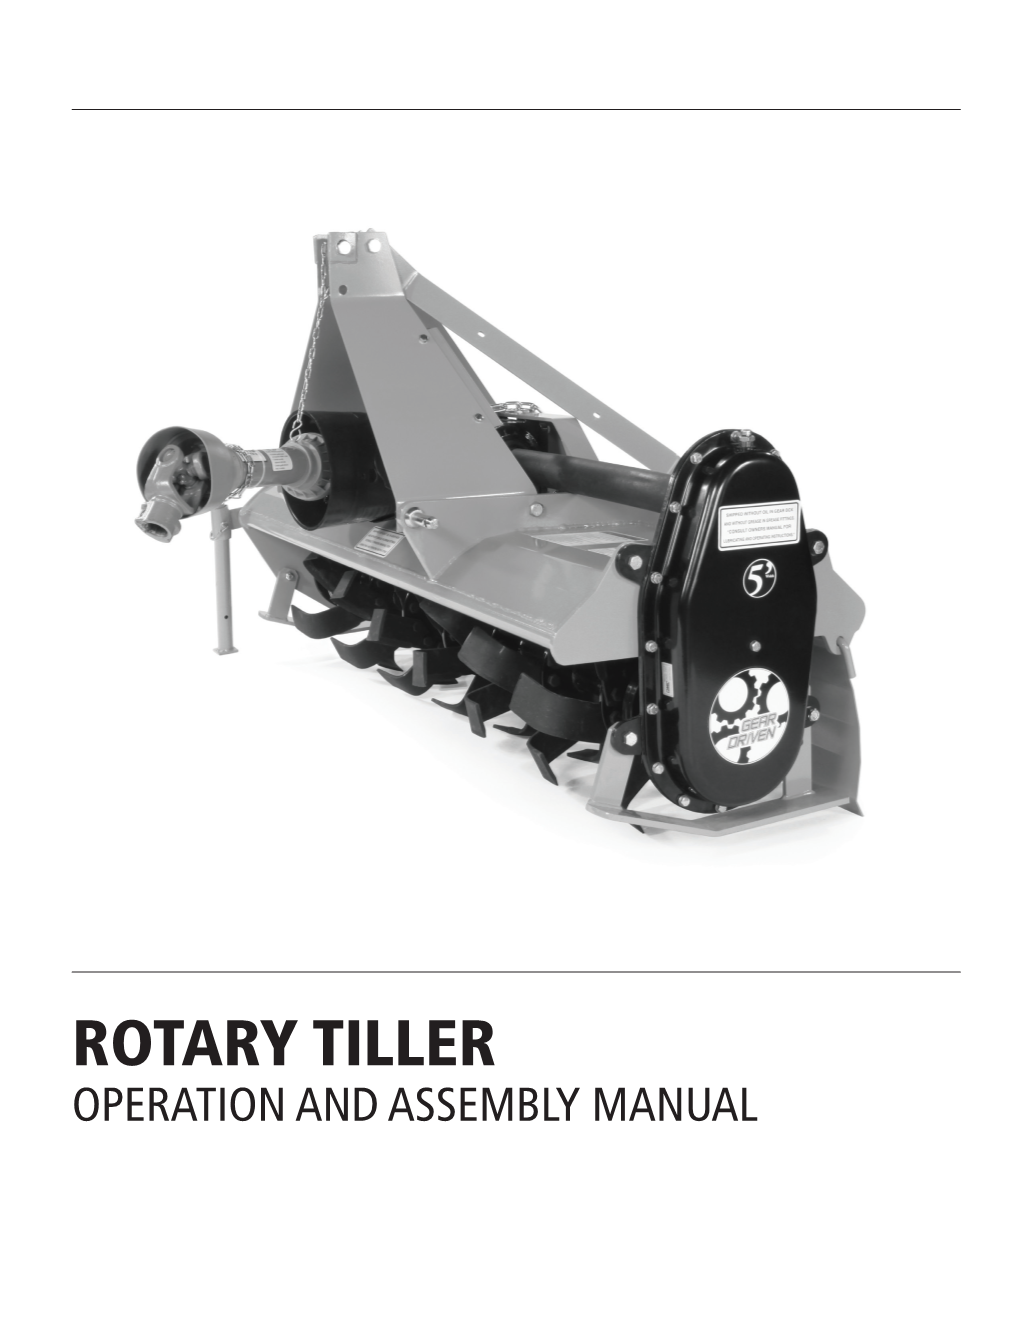 Rotary Tiller Operation and Assembly Manual Introduction